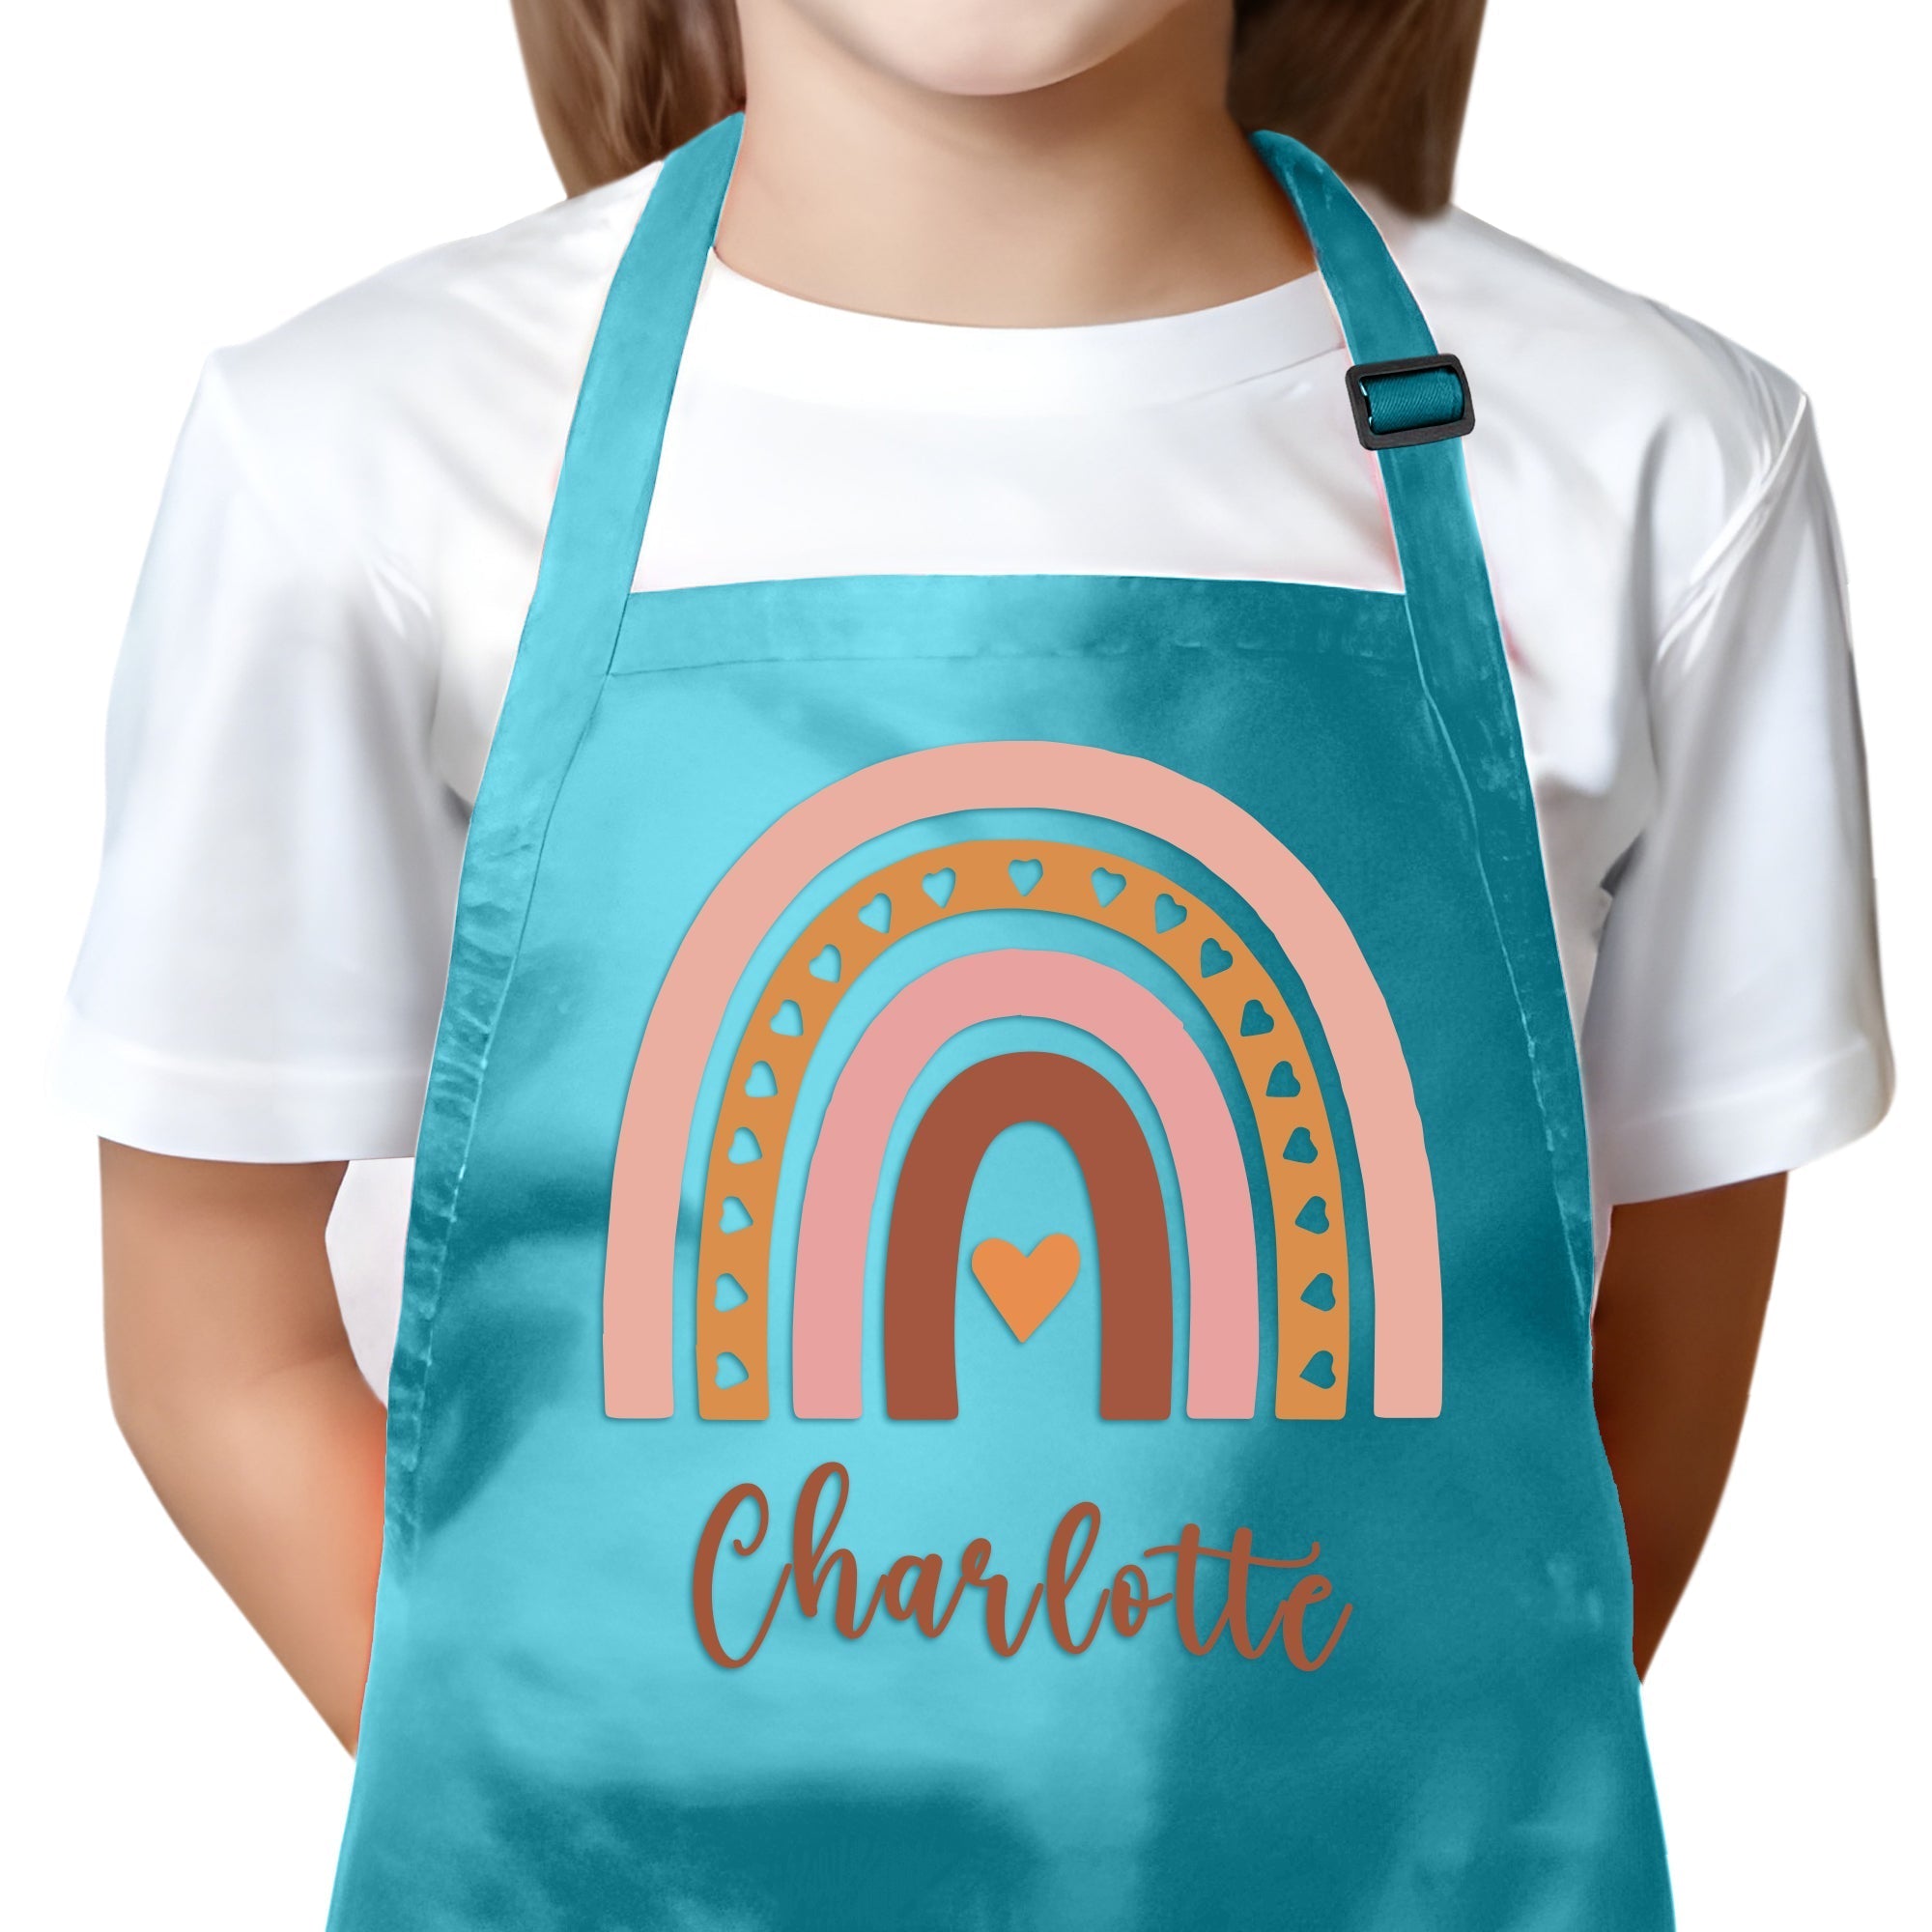 Personalized Kids Blue Apron Rainbow BOHO Design with Custom Name - Custom Children's Cooking Little Helper Kitchen Apron - Unisex Baking Blue Apron for Boys and Girls